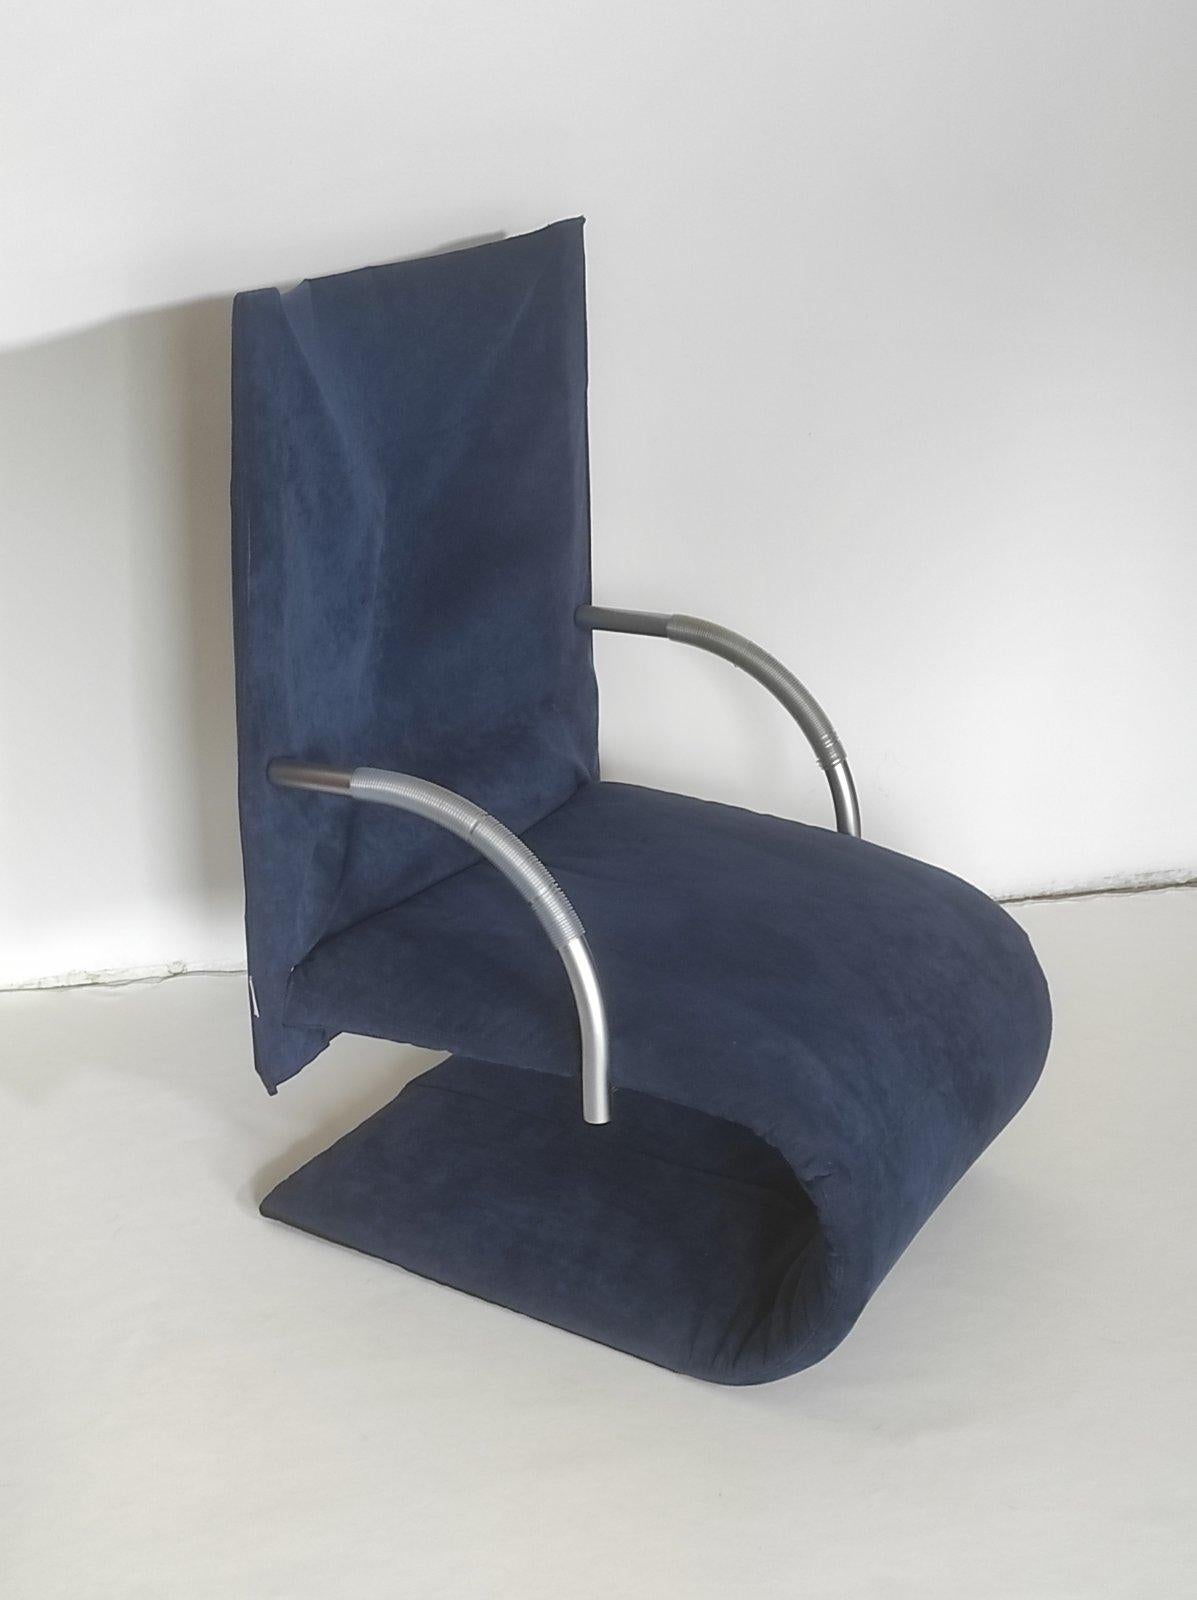 Fabric Postmodern Zen Longue Chair By Claude Brisson for Ligne Roset 1980s For Sale